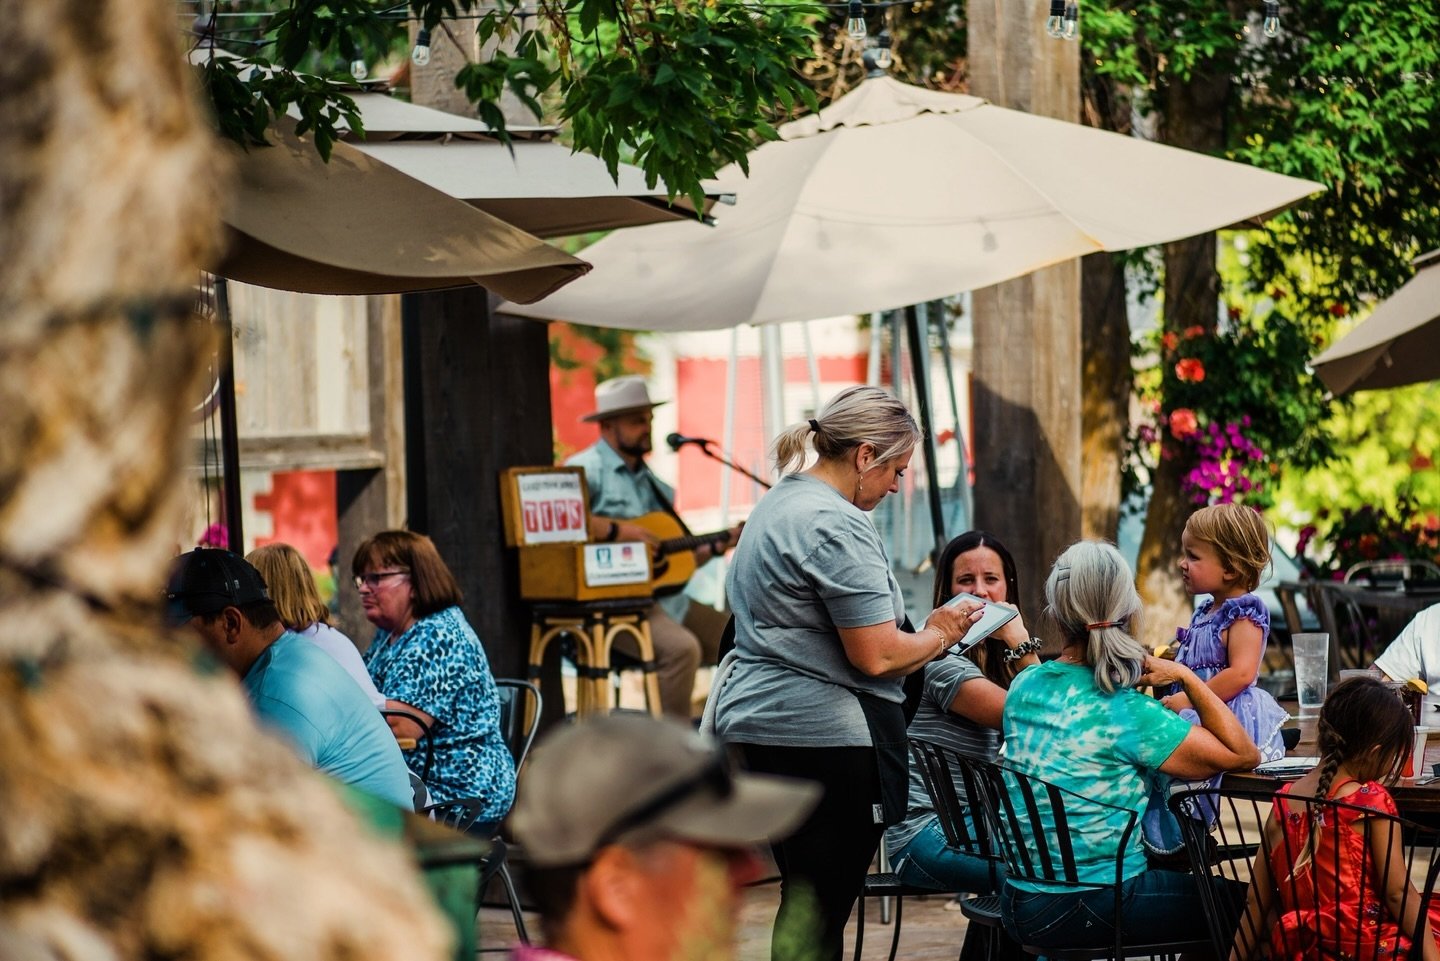 **CLOSED for Summer Maintenance May 6-10**

We&rsquo;re preparing for summer by replacing some of our Alpenglobes with open patio seating and live music. We&rsquo;ll be back in action May 11!